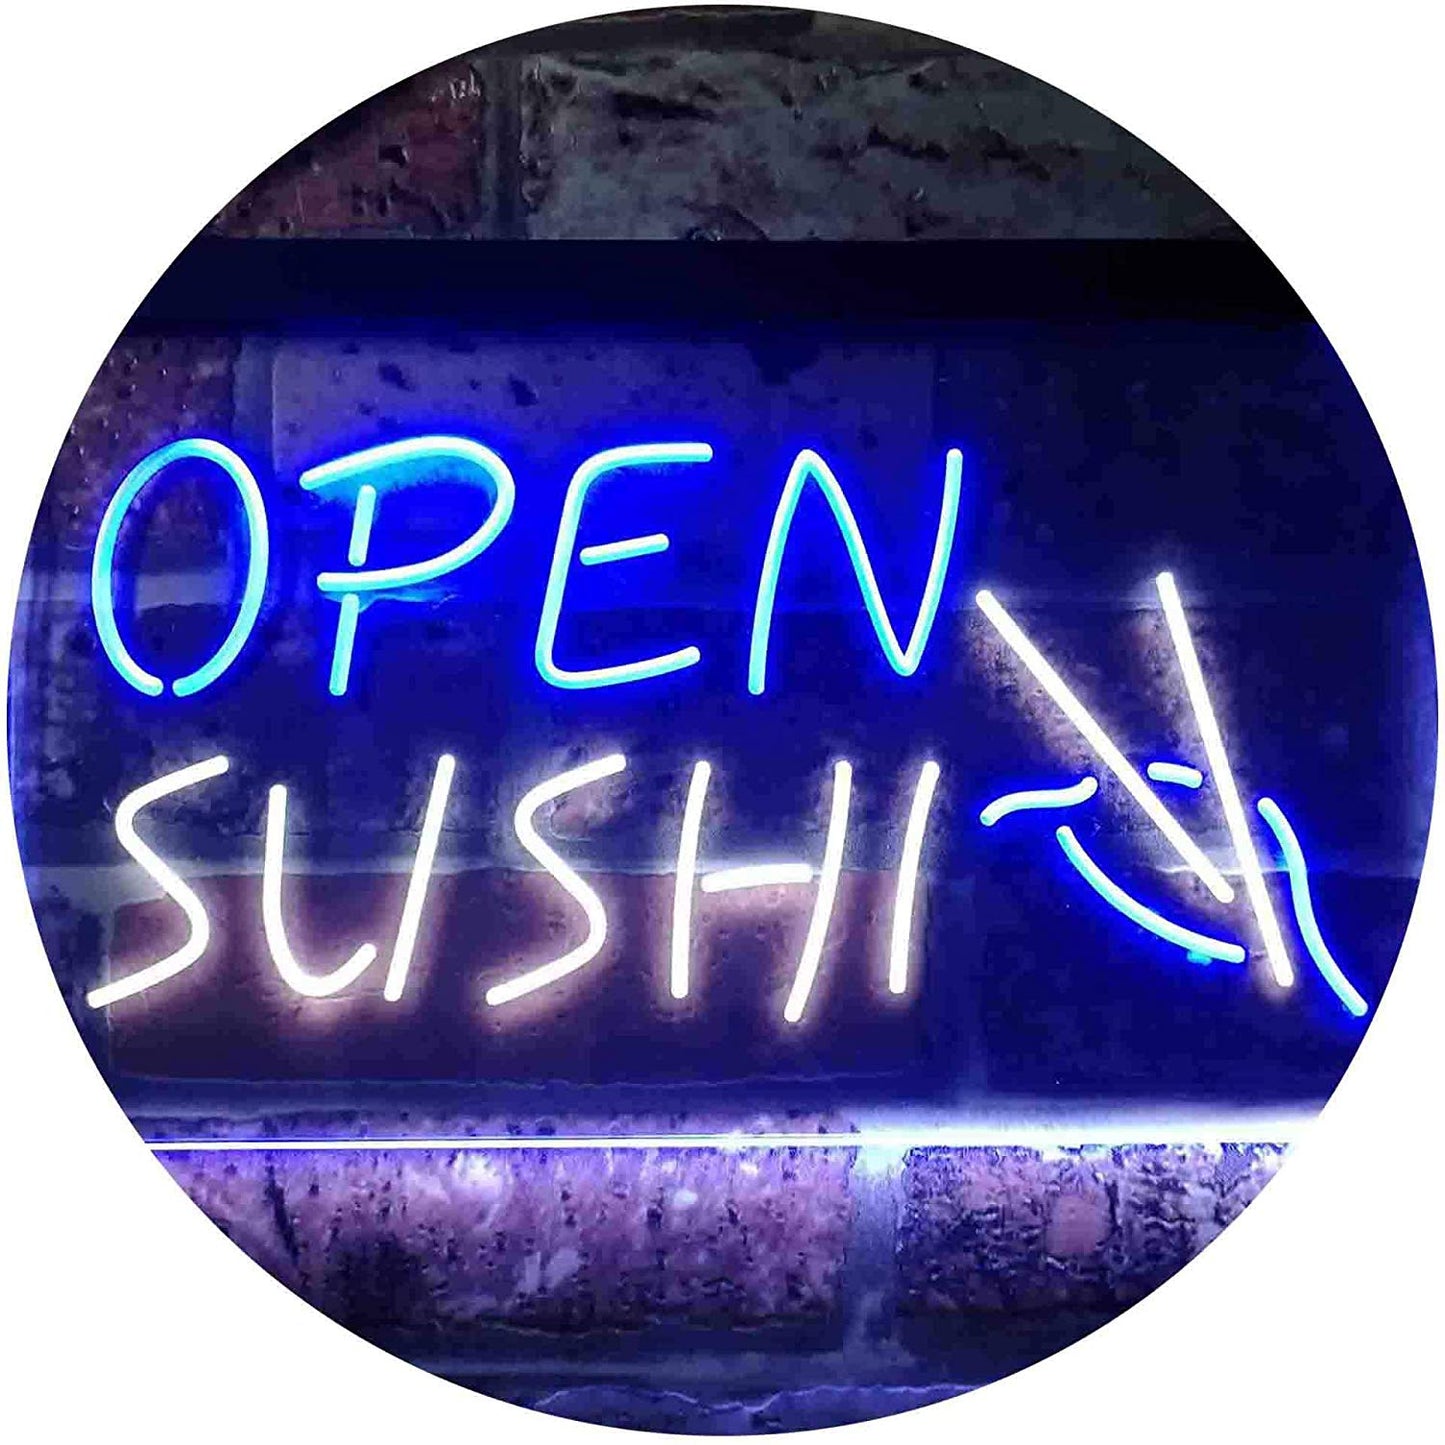 Open Sushi LED Neon Light Sign - Way Up Gifts